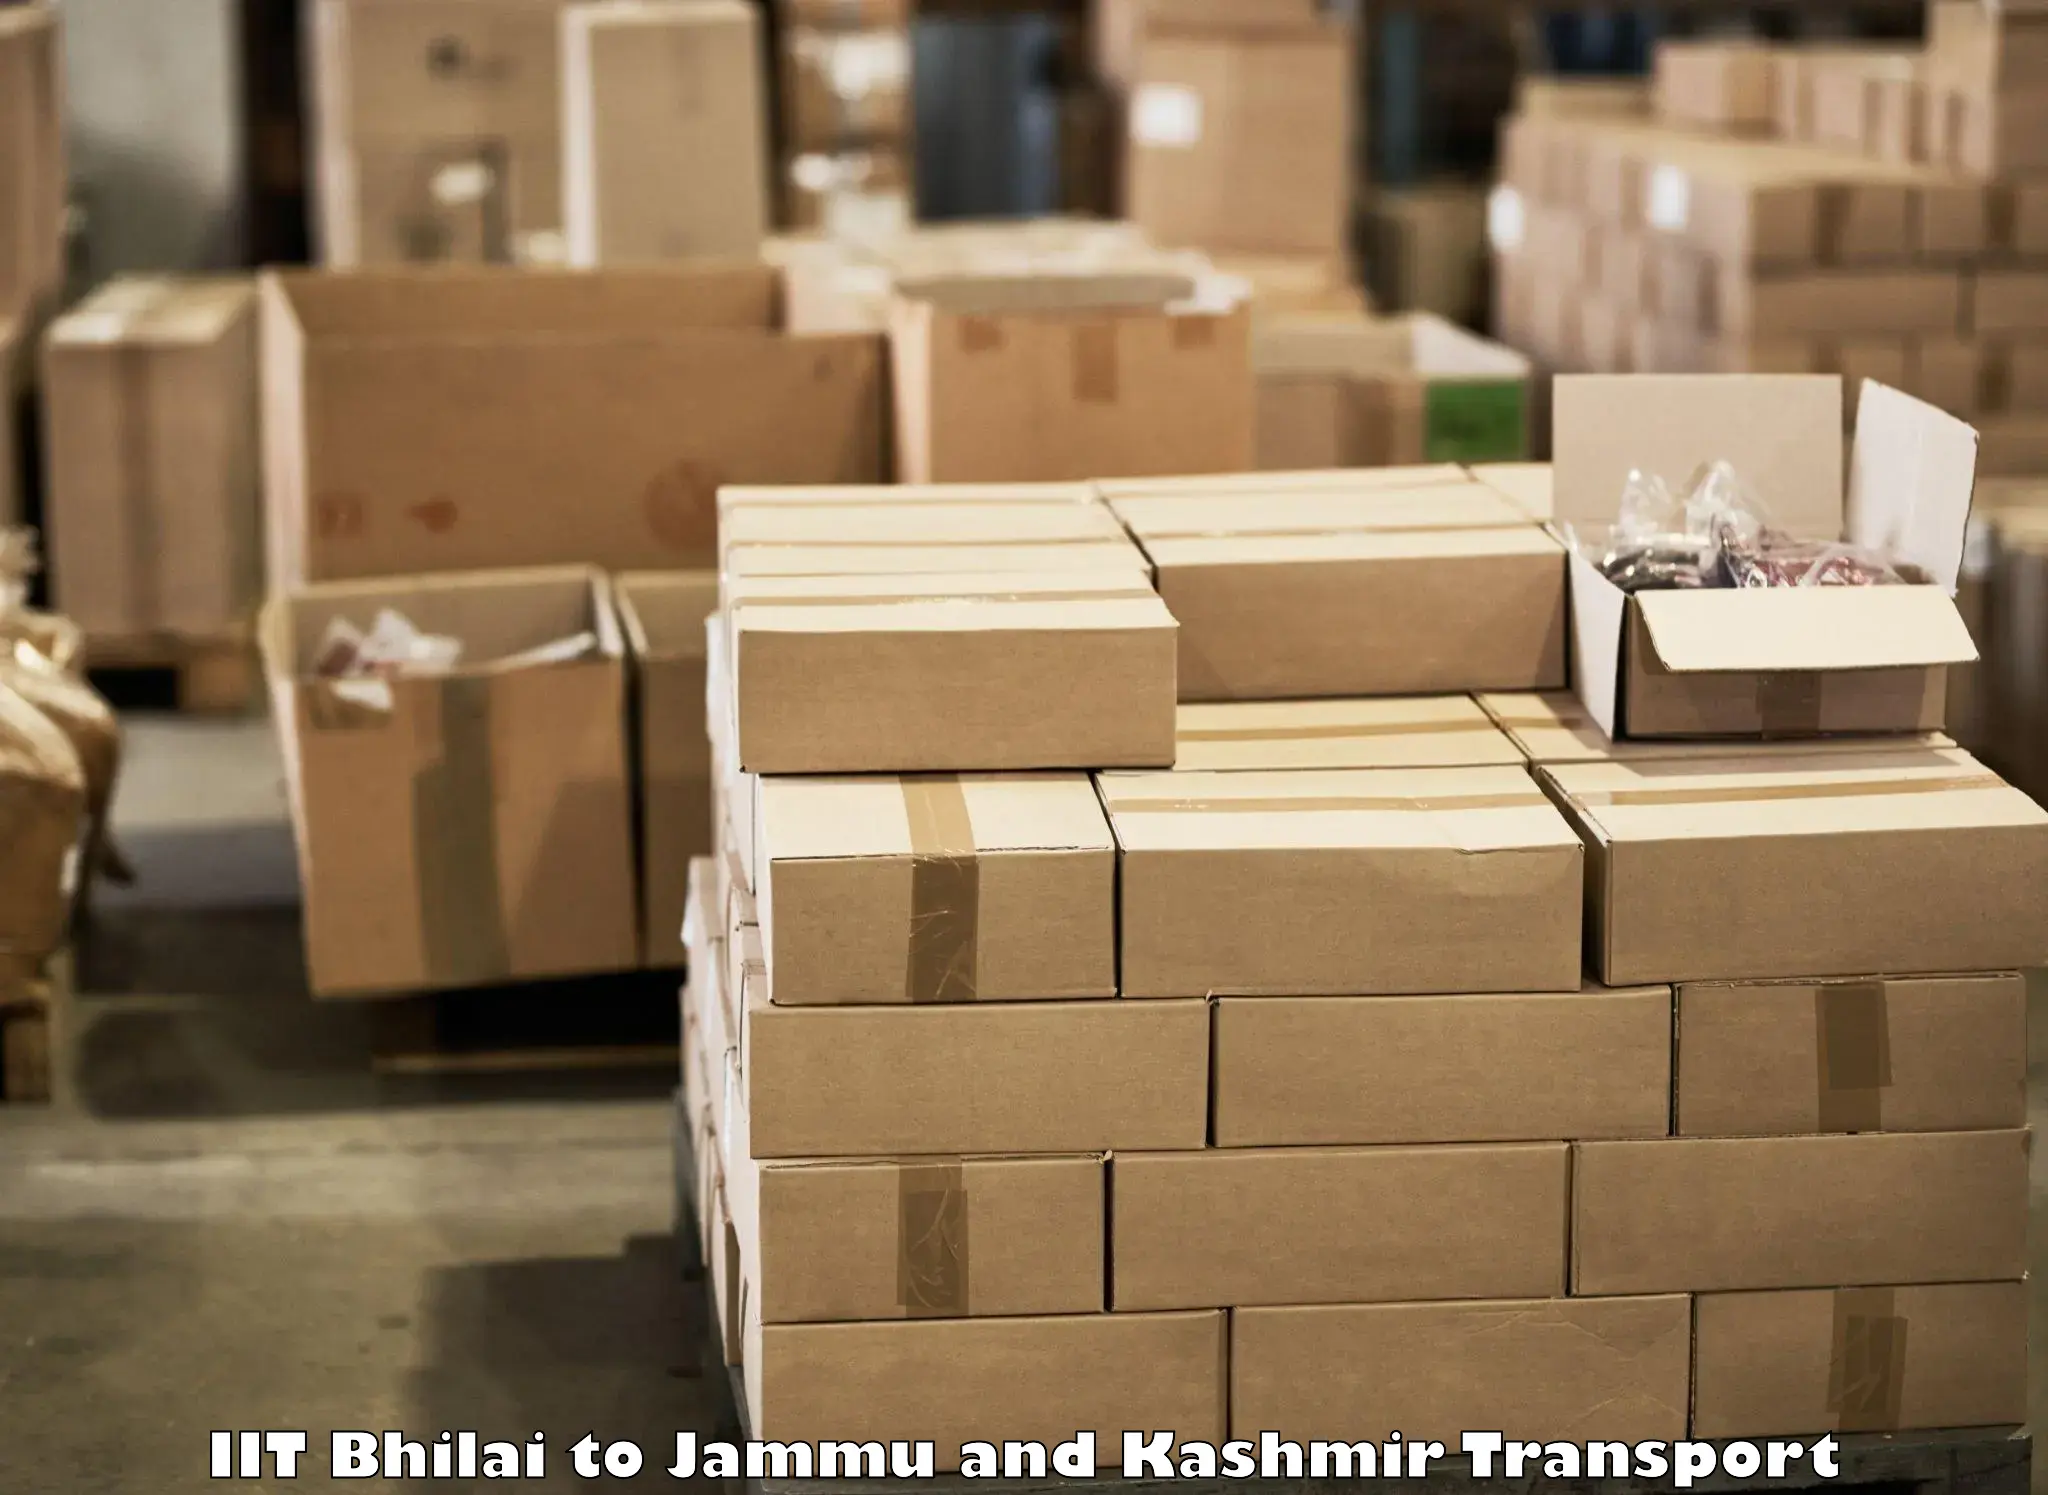 Daily parcel service transport IIT Bhilai to Leh